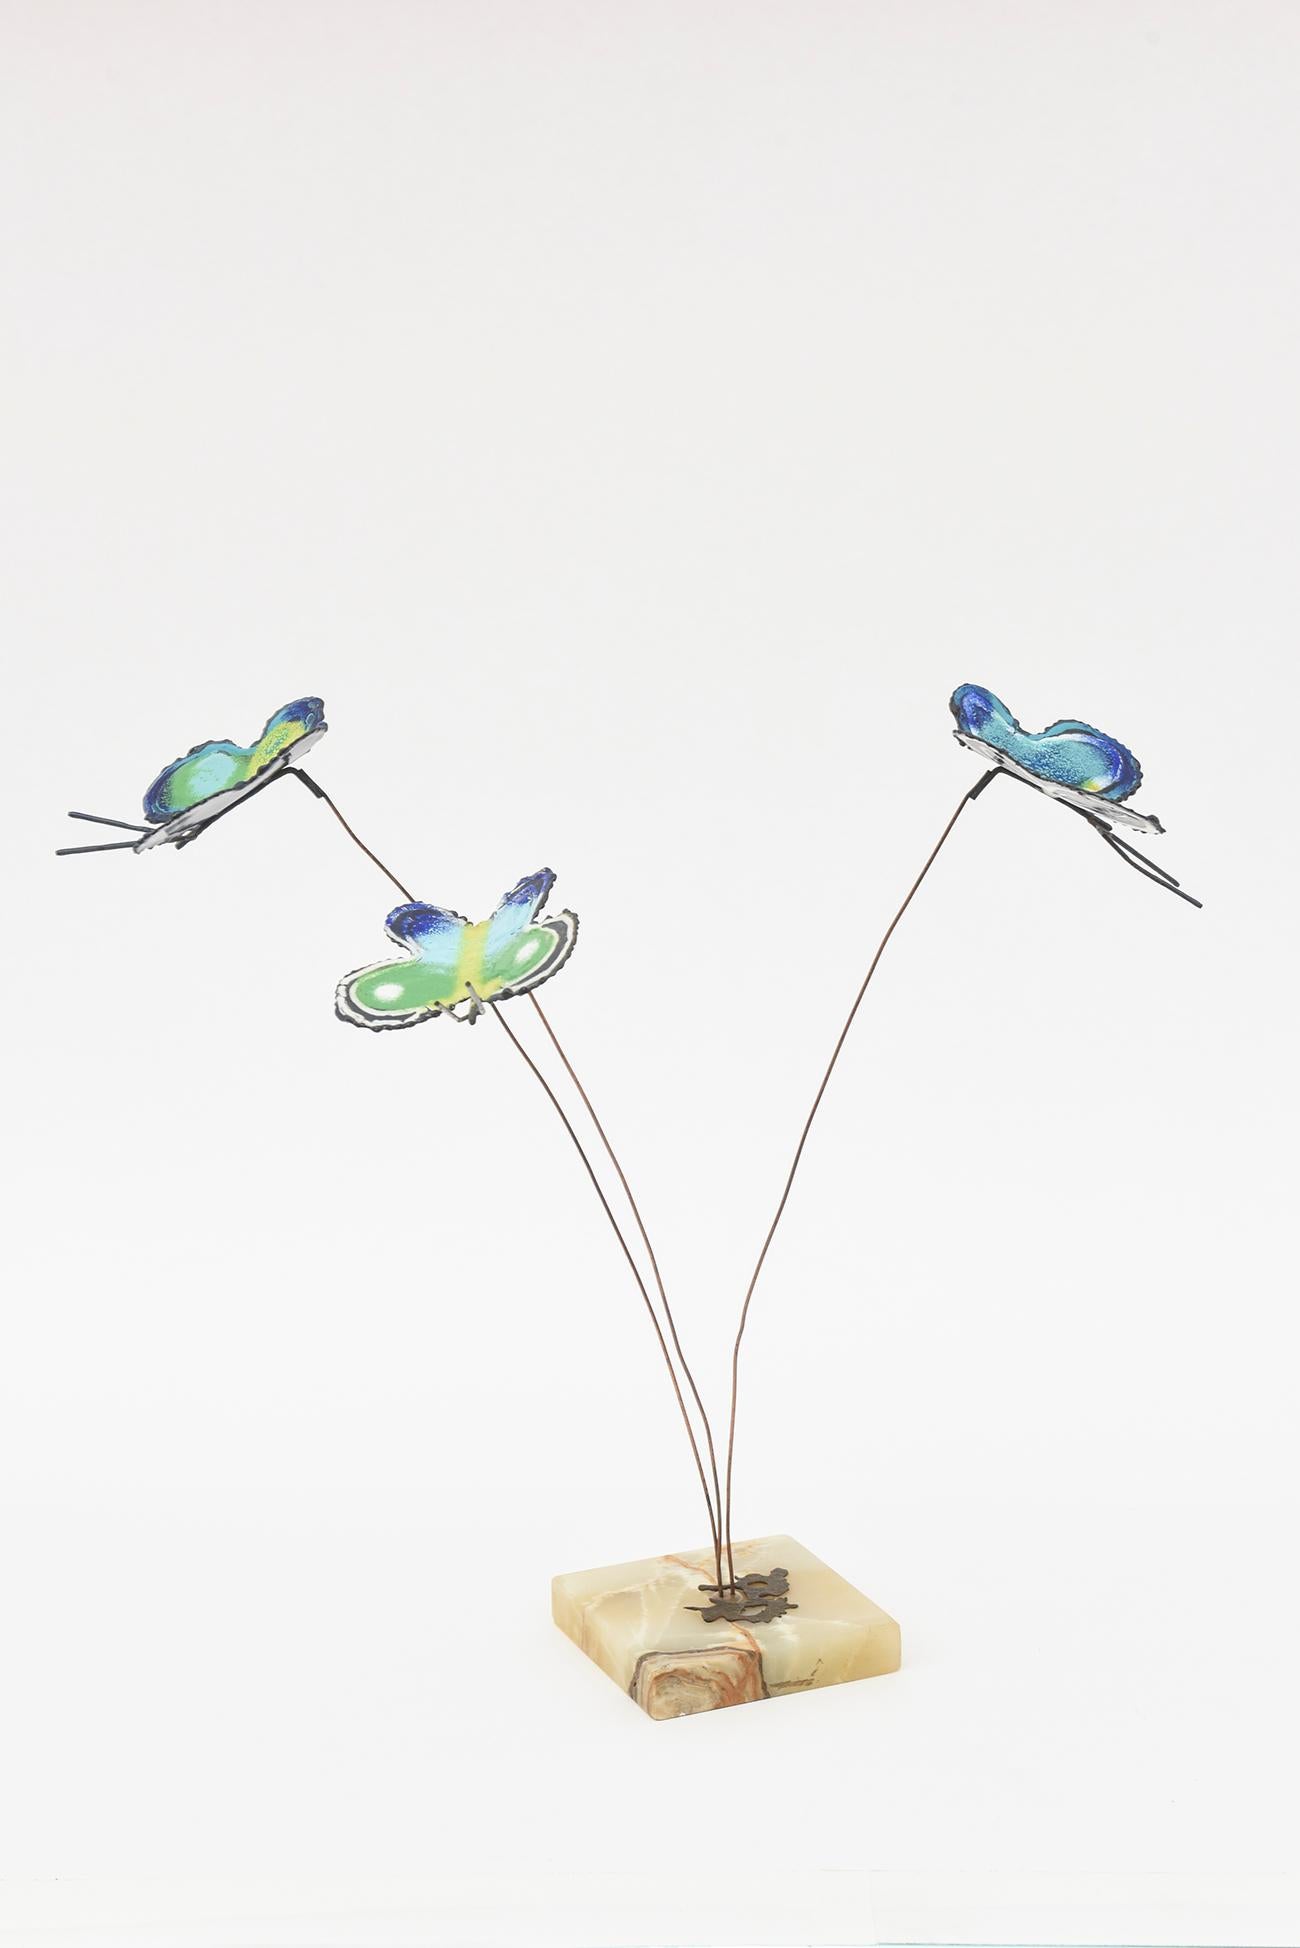 This unusual and rarely found vintage signed Curtis Jere sculpture has enameled butterflies coming from 3 wire points that sit in the original marble base. The colors of shades of sea green, green, turquoise, blues, yellows and with white are the